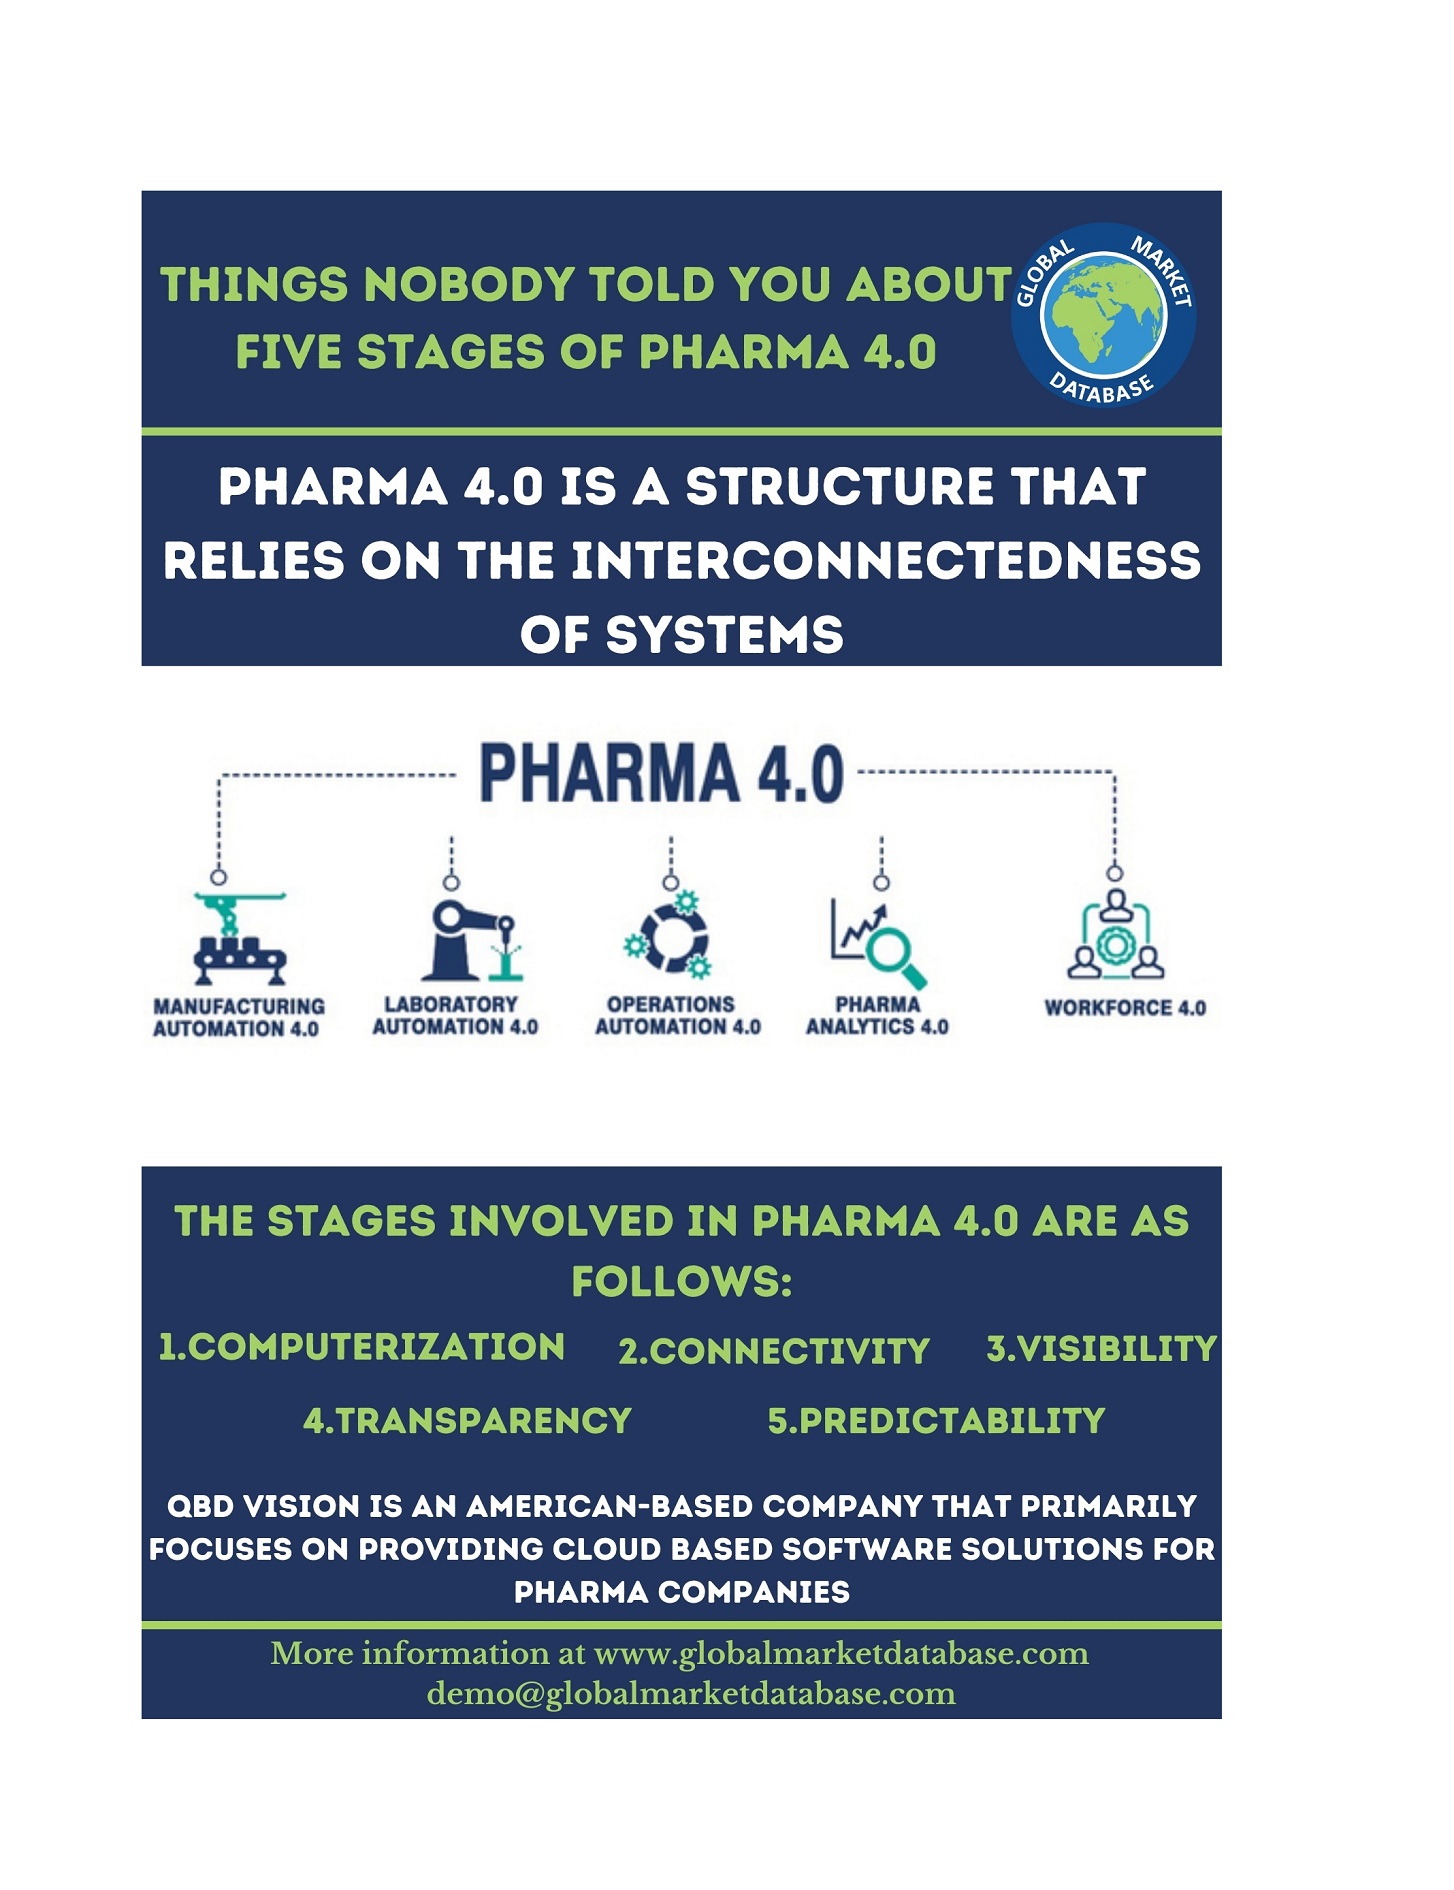 Things Nobody Told You About Five Stages of Pharma 4.0 - Copy